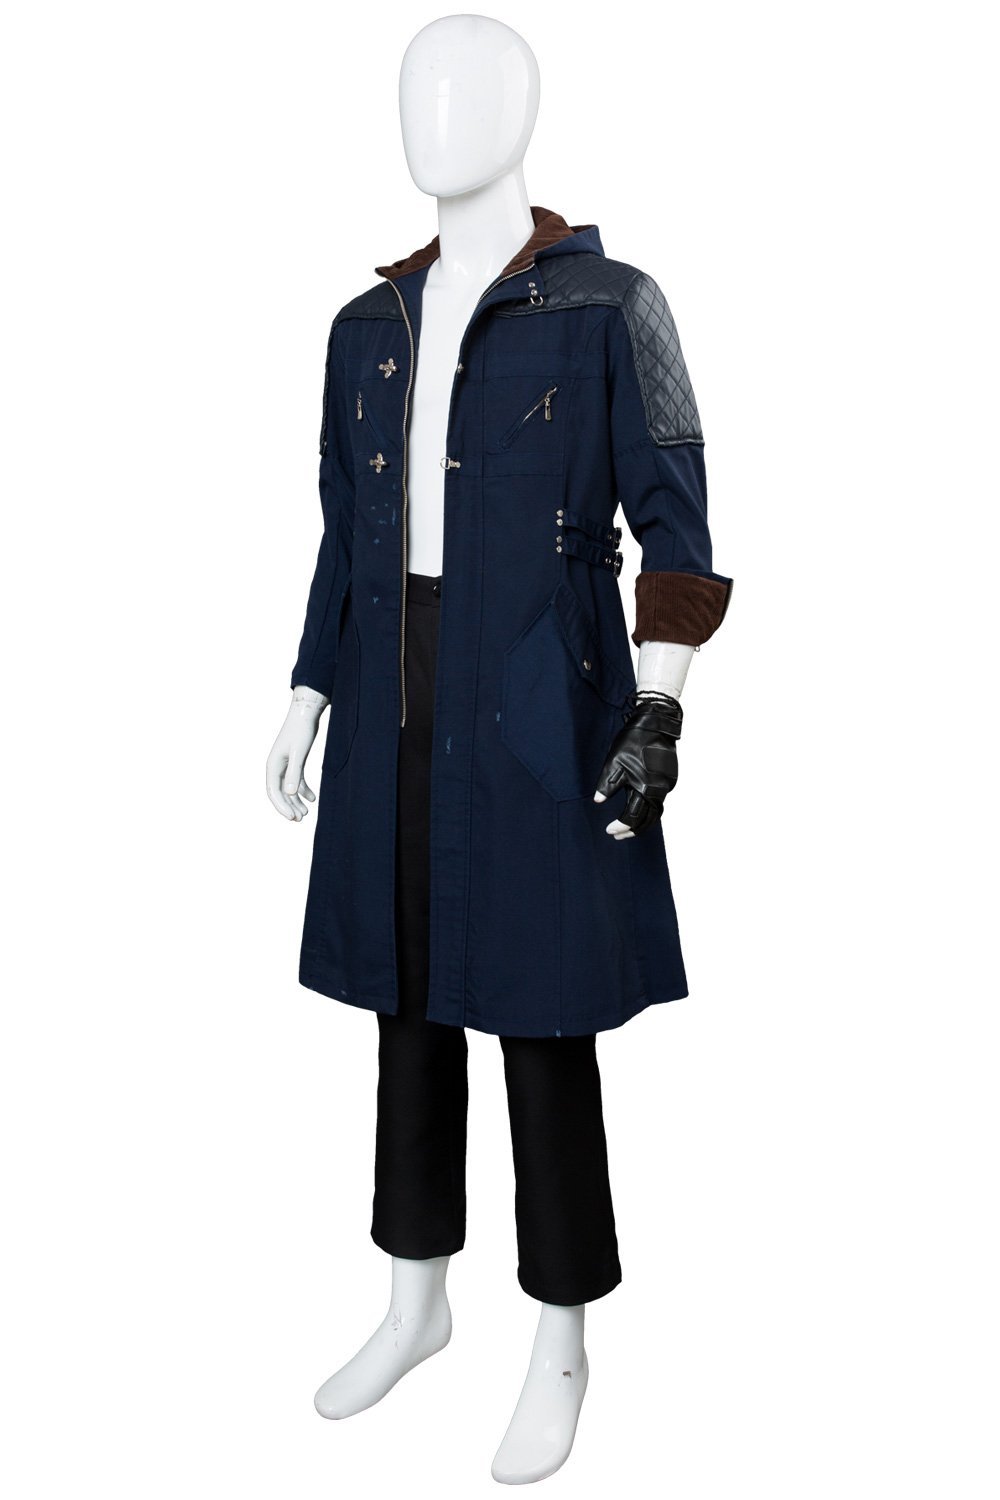 DMC Devil May Cry V Nero Outfit Cosplay Costume